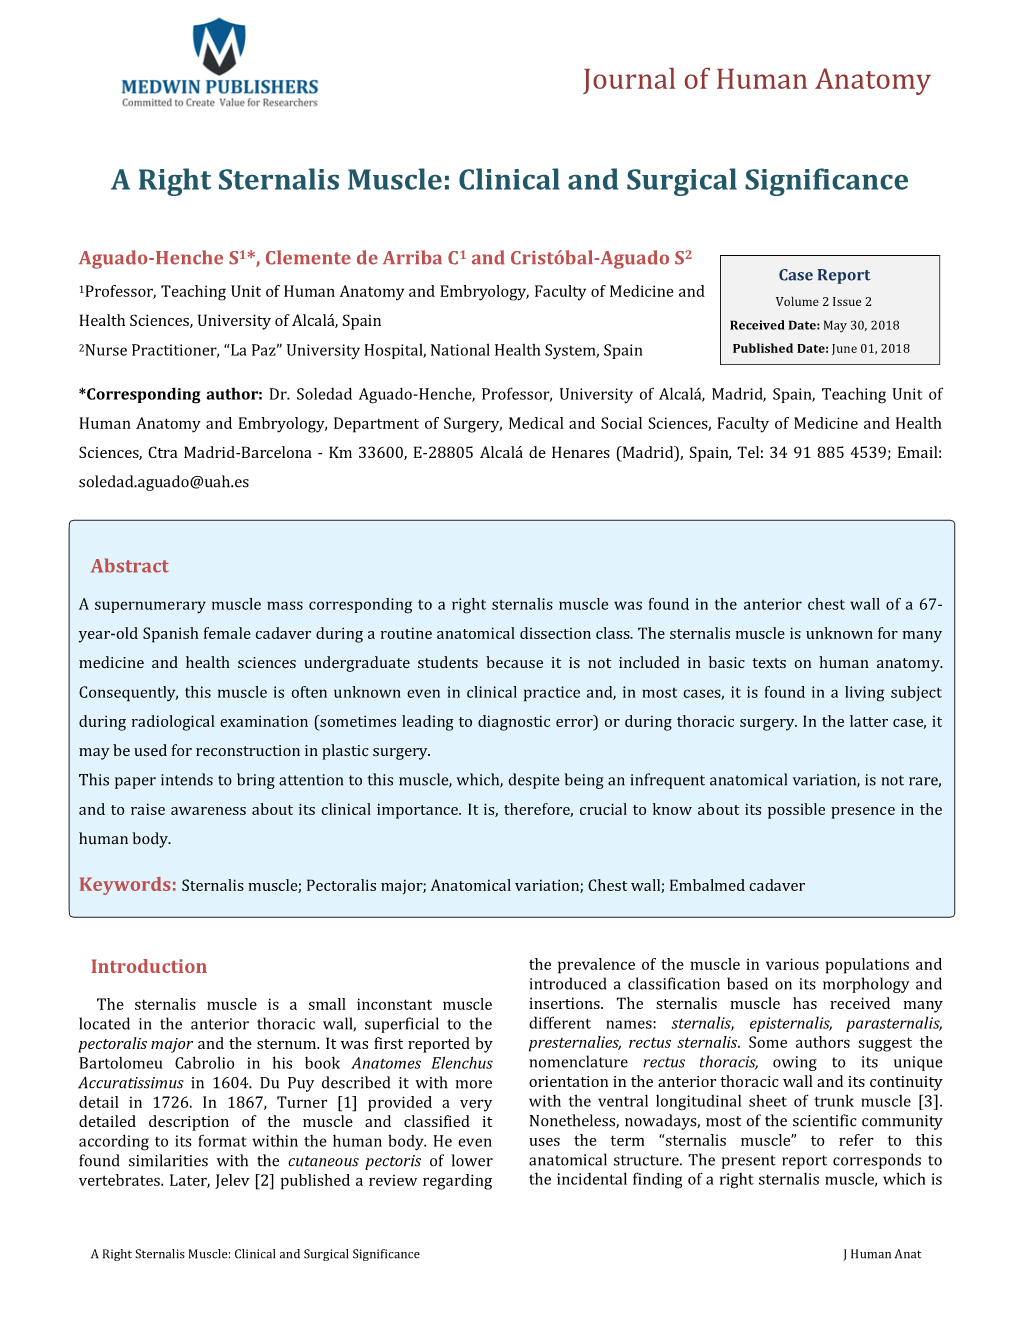 A Right Sternalis Muscle: Clinical and Surgical Significance